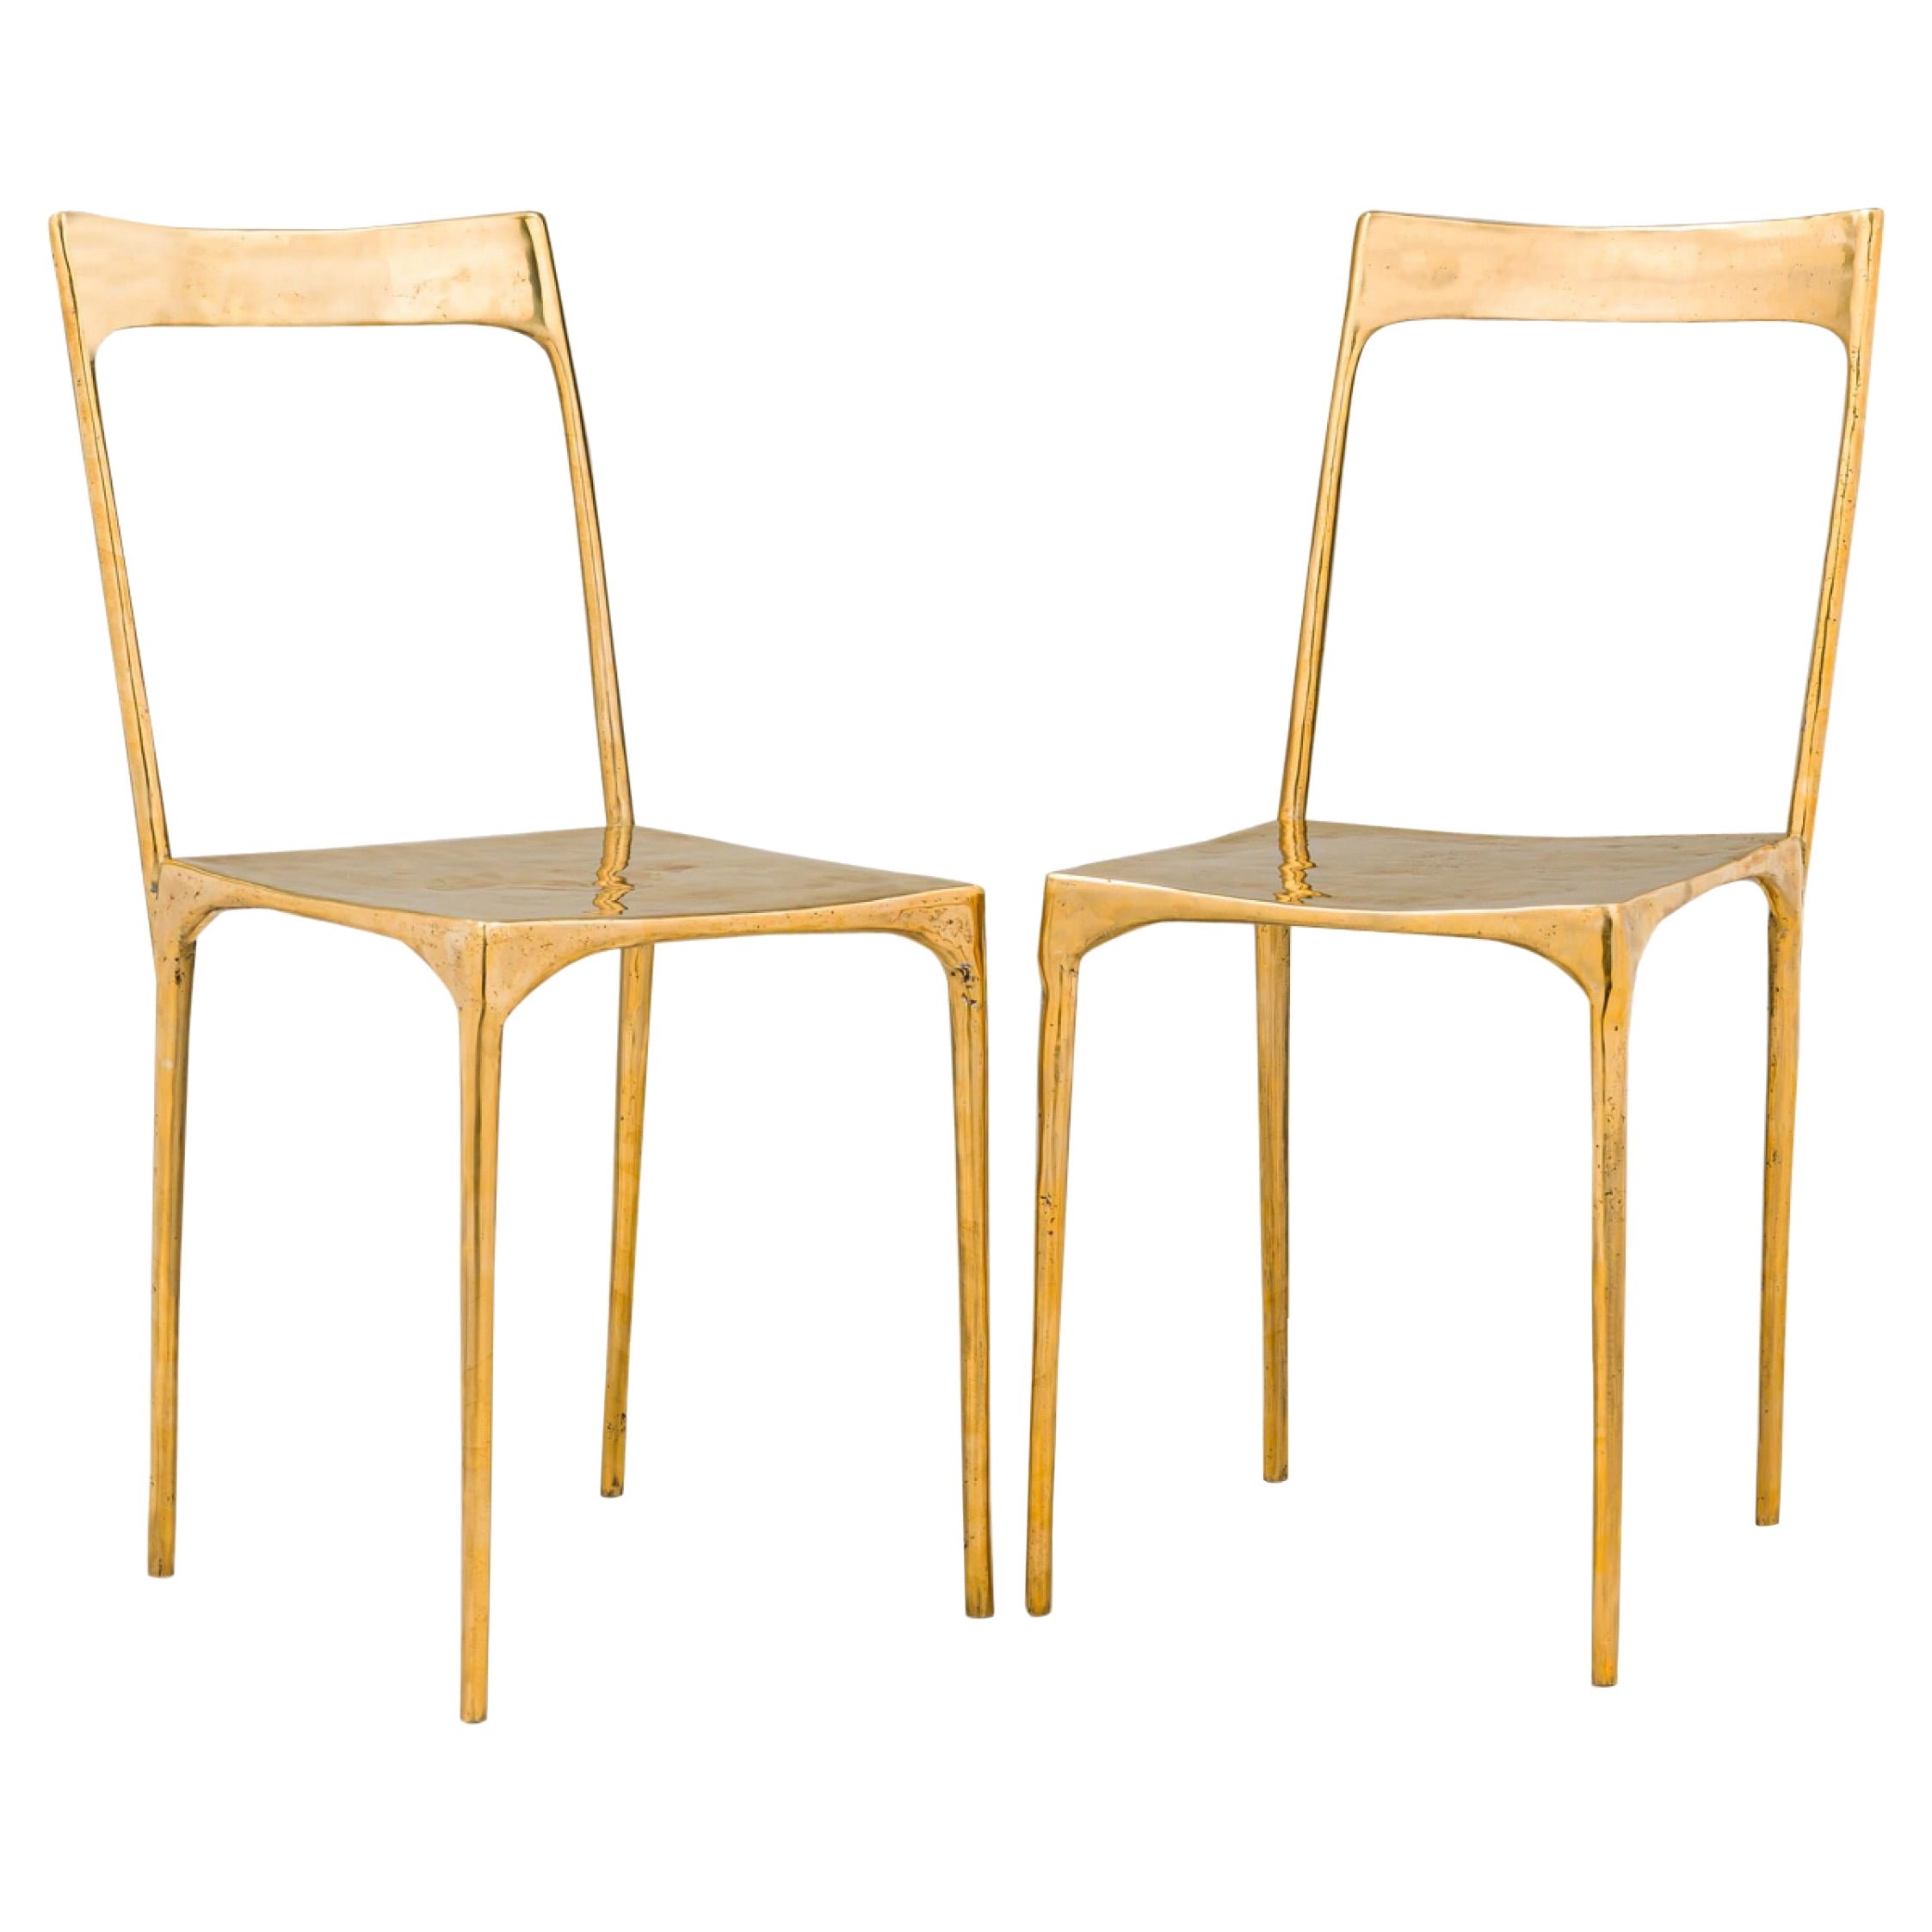 "Banquete" Contemporary Polished Bronze Side Chairs